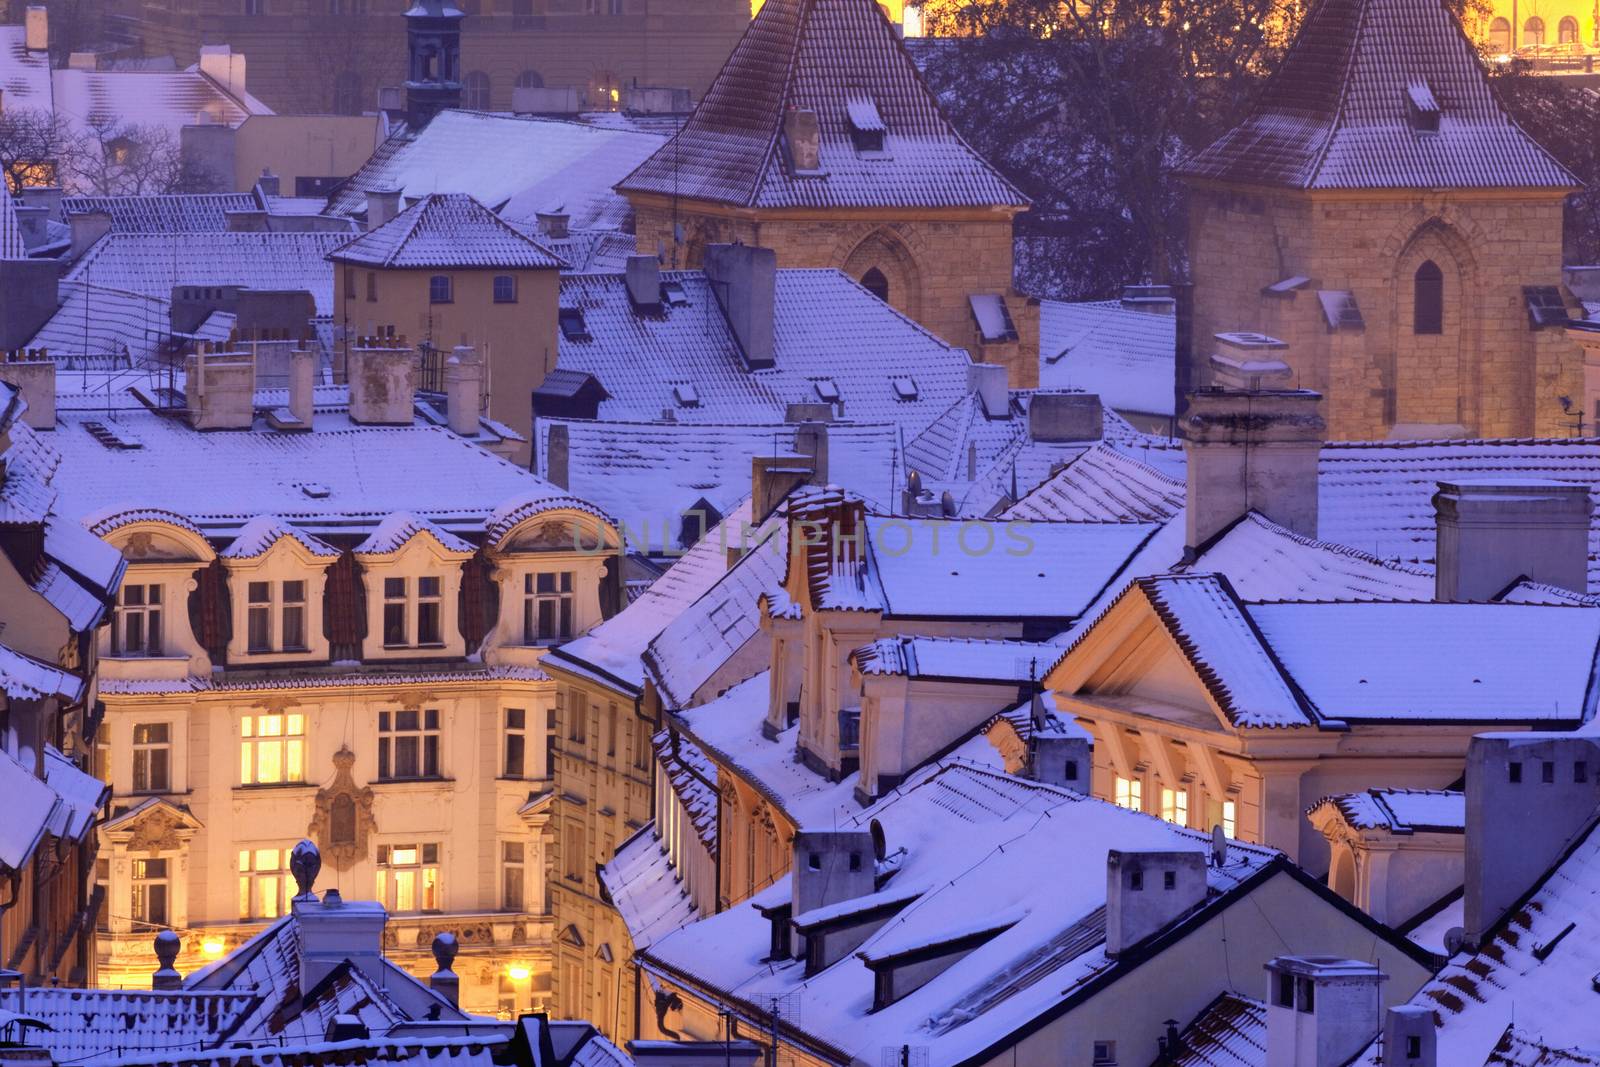 prague - winter view of lesser town rooftops covered with snow